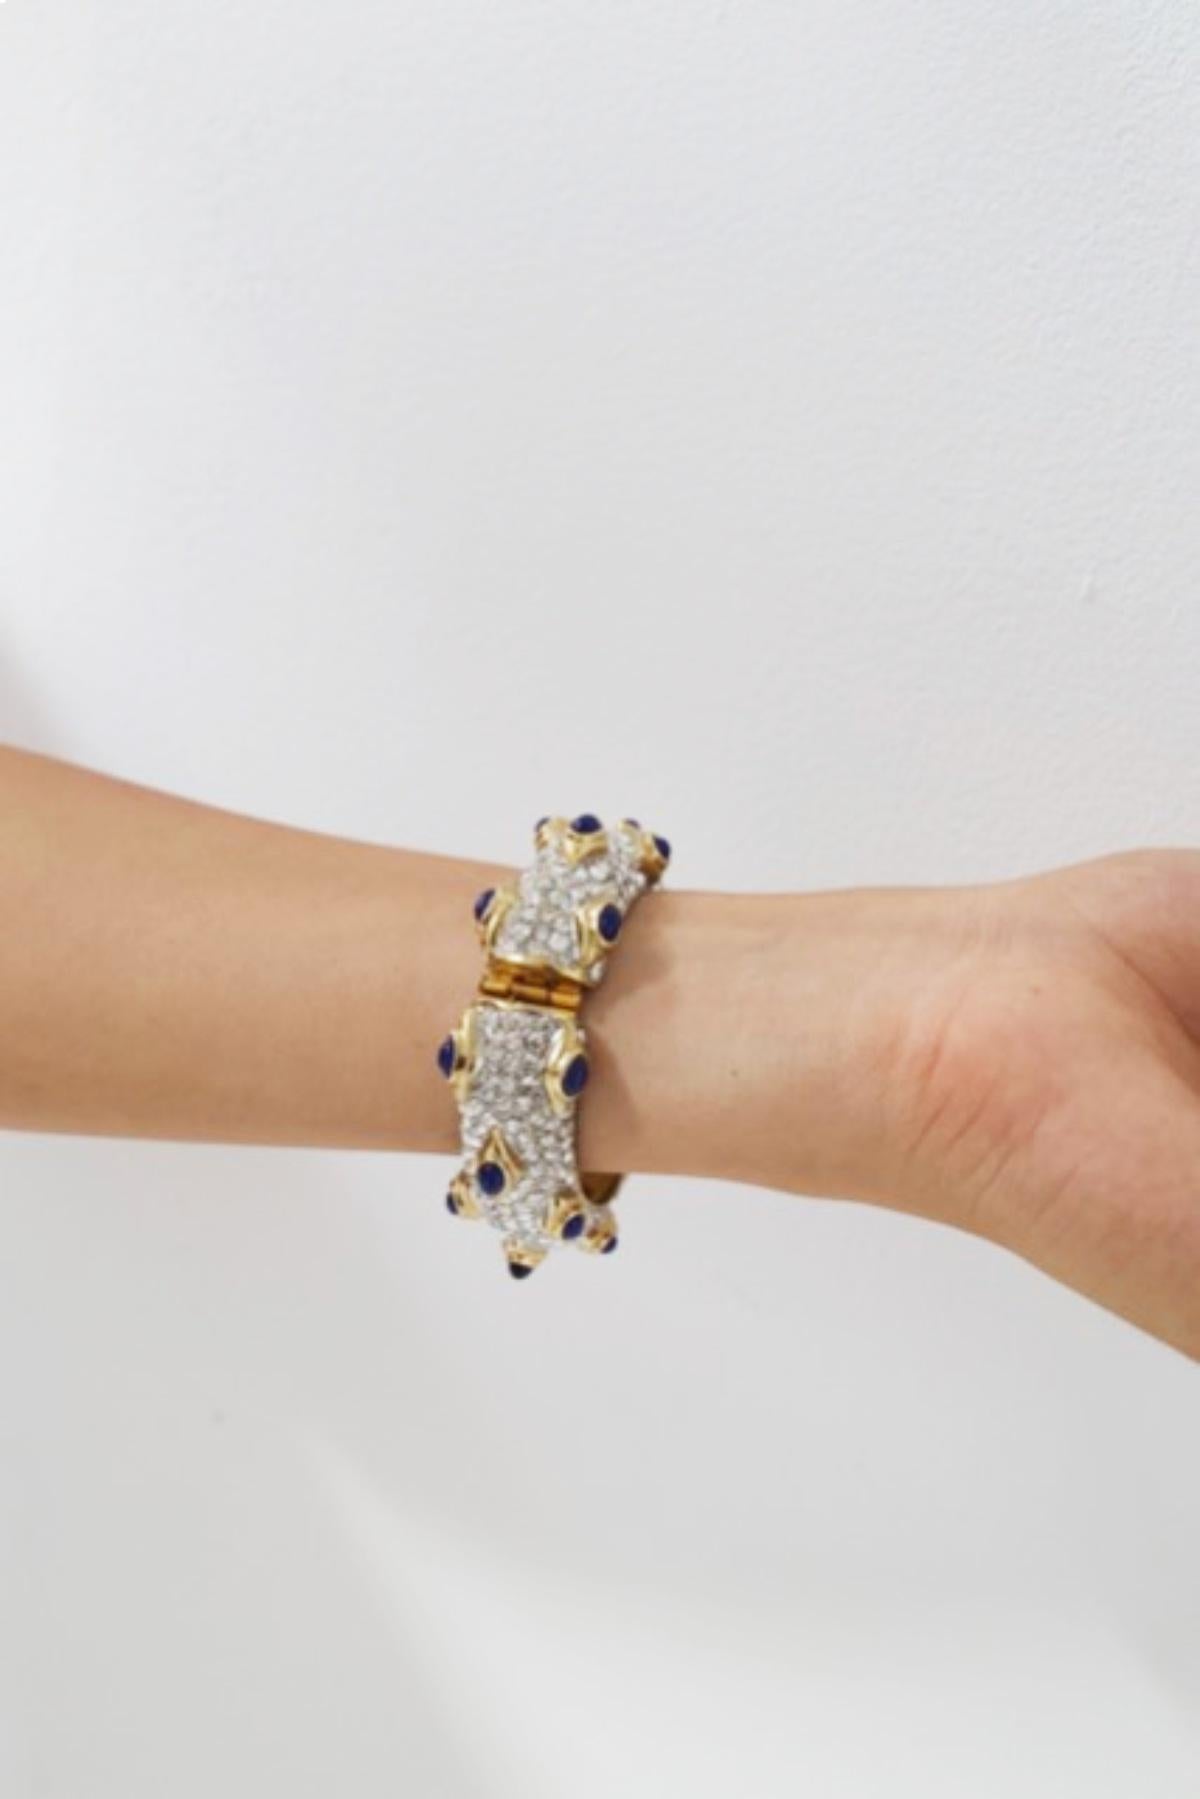 Kenneth Lane Gold Bracelet with Blue Stones In Good Condition For Sale In Milano, IT